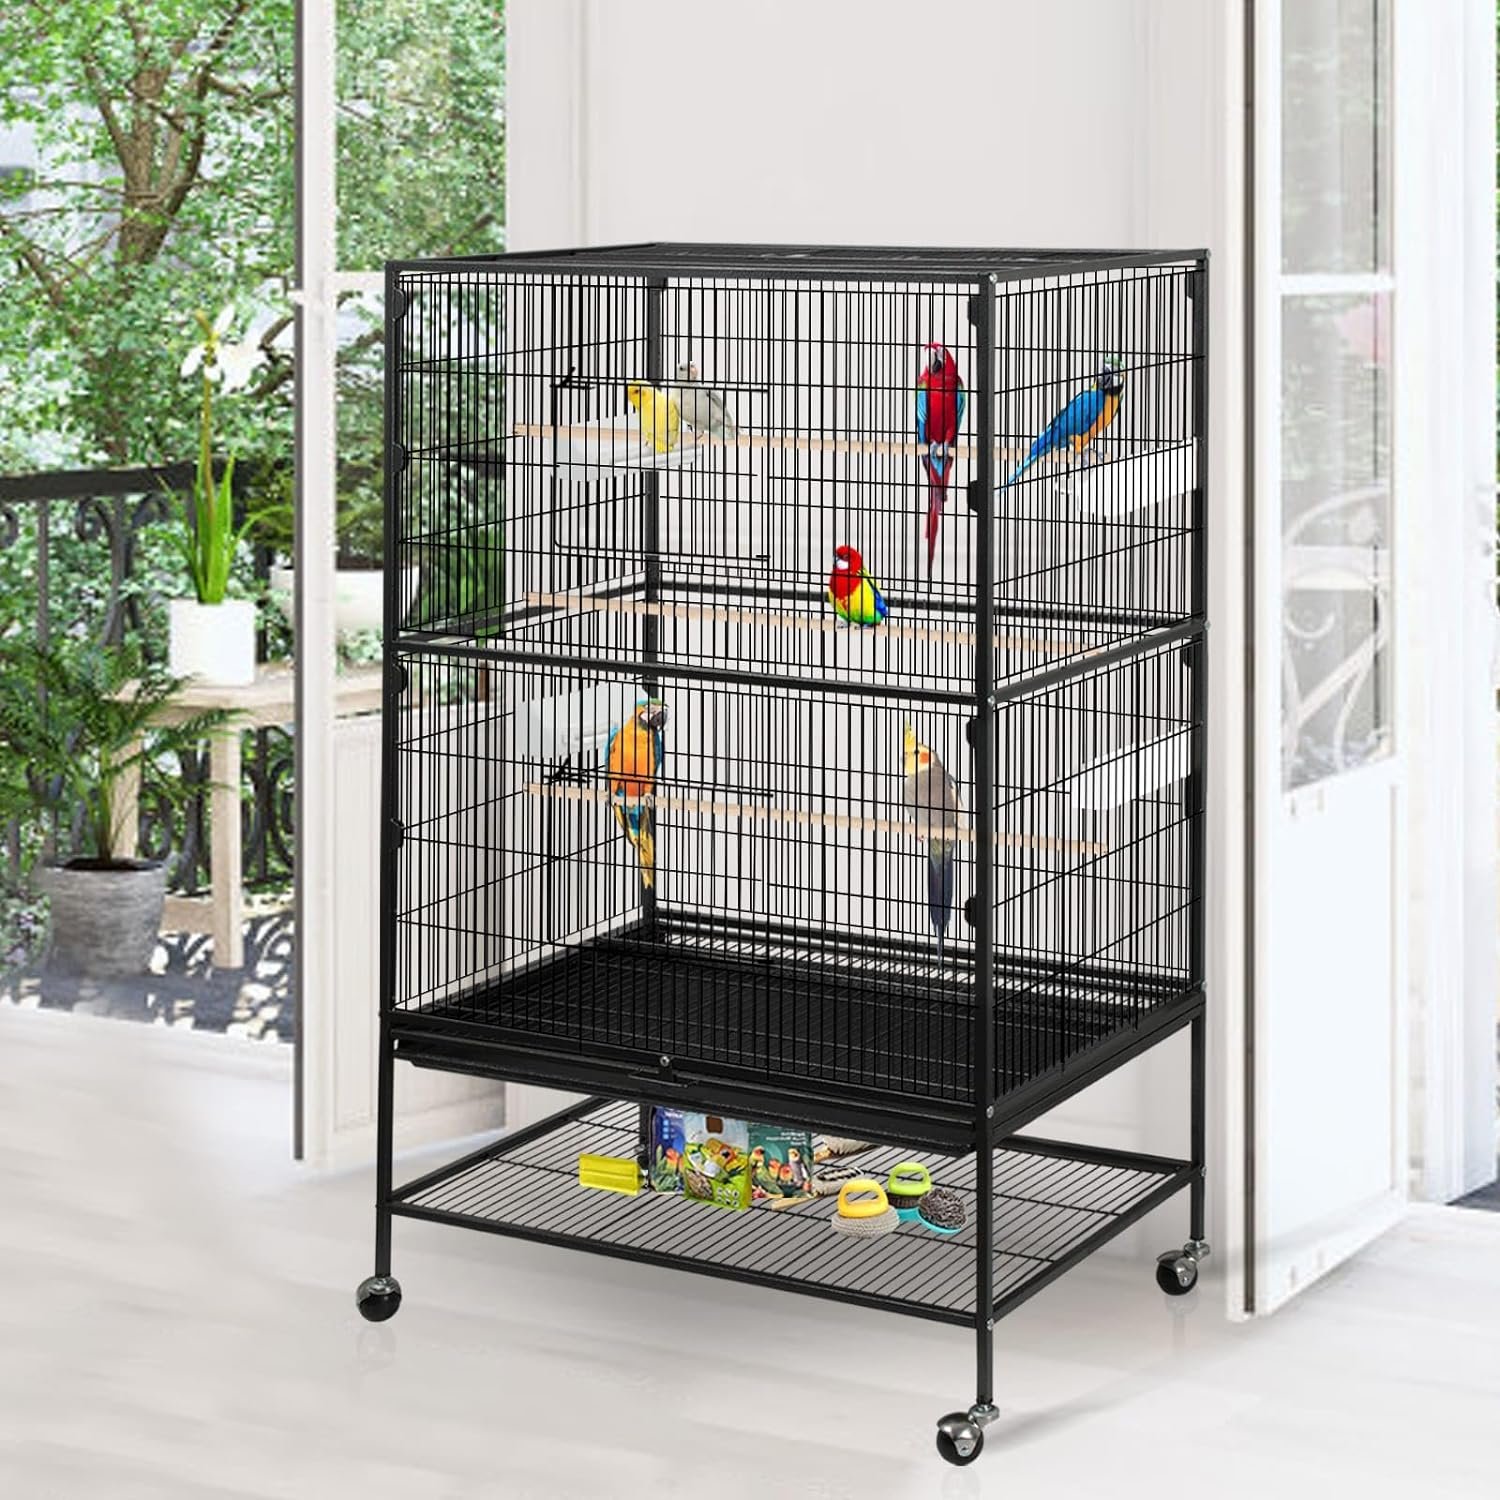 Jhsomdr Bird Cage 52 Inch Standing Wrought Iron Large Parrot Cage for Cockatiels African Grey Quaker Parrotlet Green Cheek Indian Ring Neck Pigeons Parakeets Flight Cage with Rolling Stand